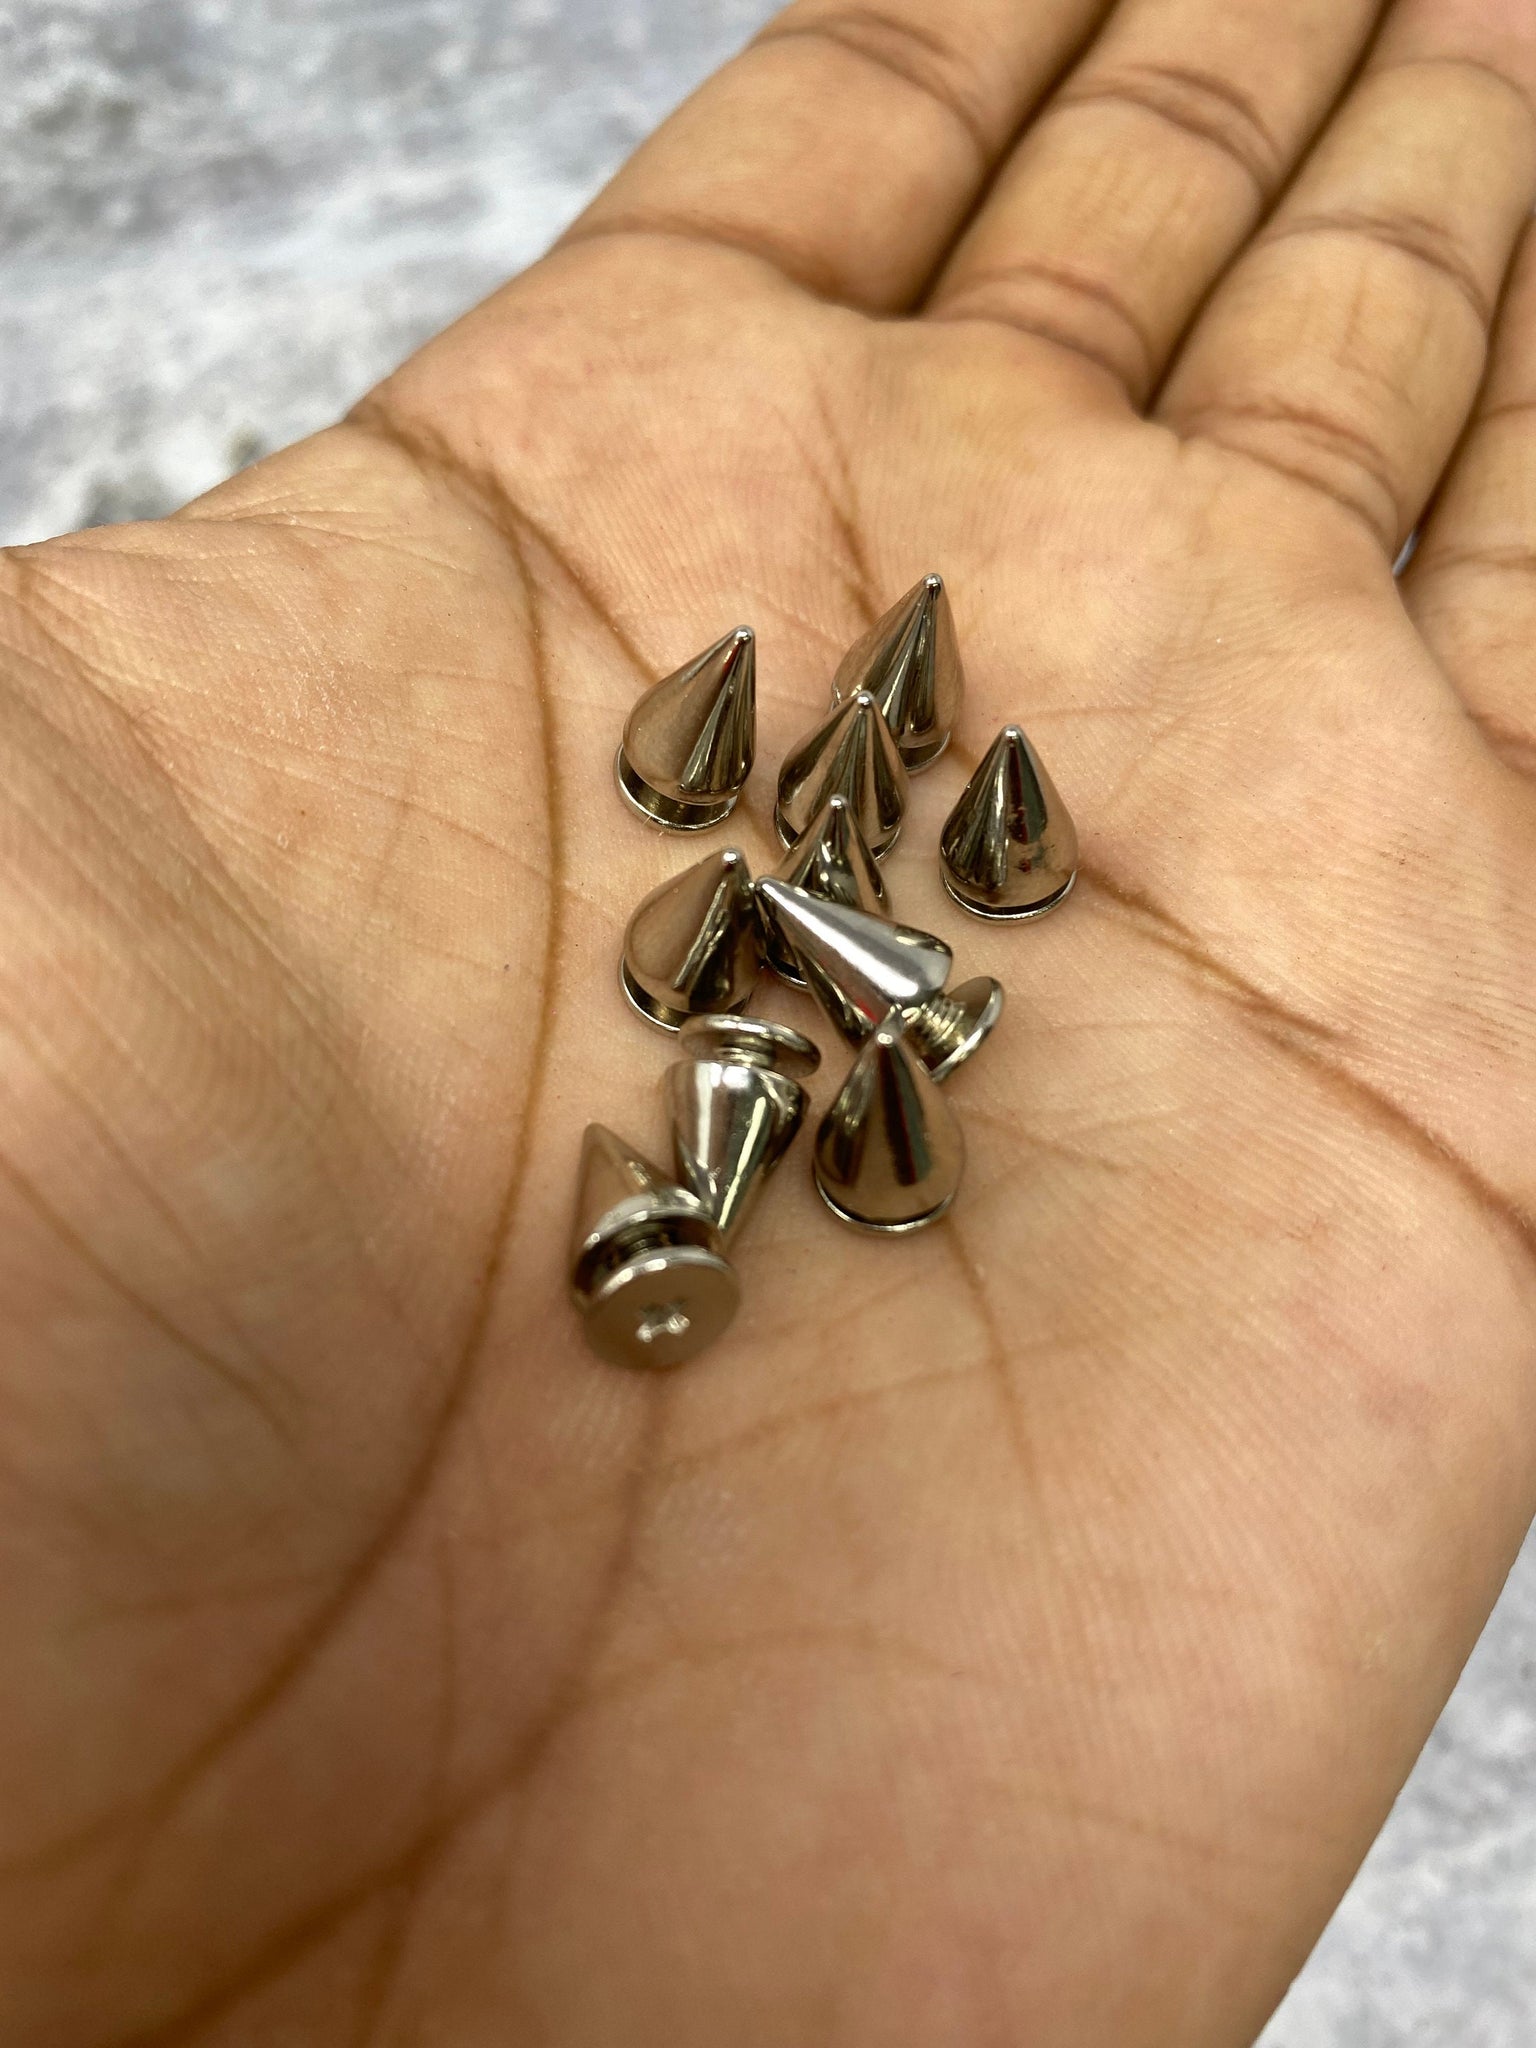 NEW, "Screw on Spikes", 10mm "SILVER" Spiked Studs, Cone Spikes Screw-back Studs for Clothing, Leather, Spikes with Screws, 100 PCS